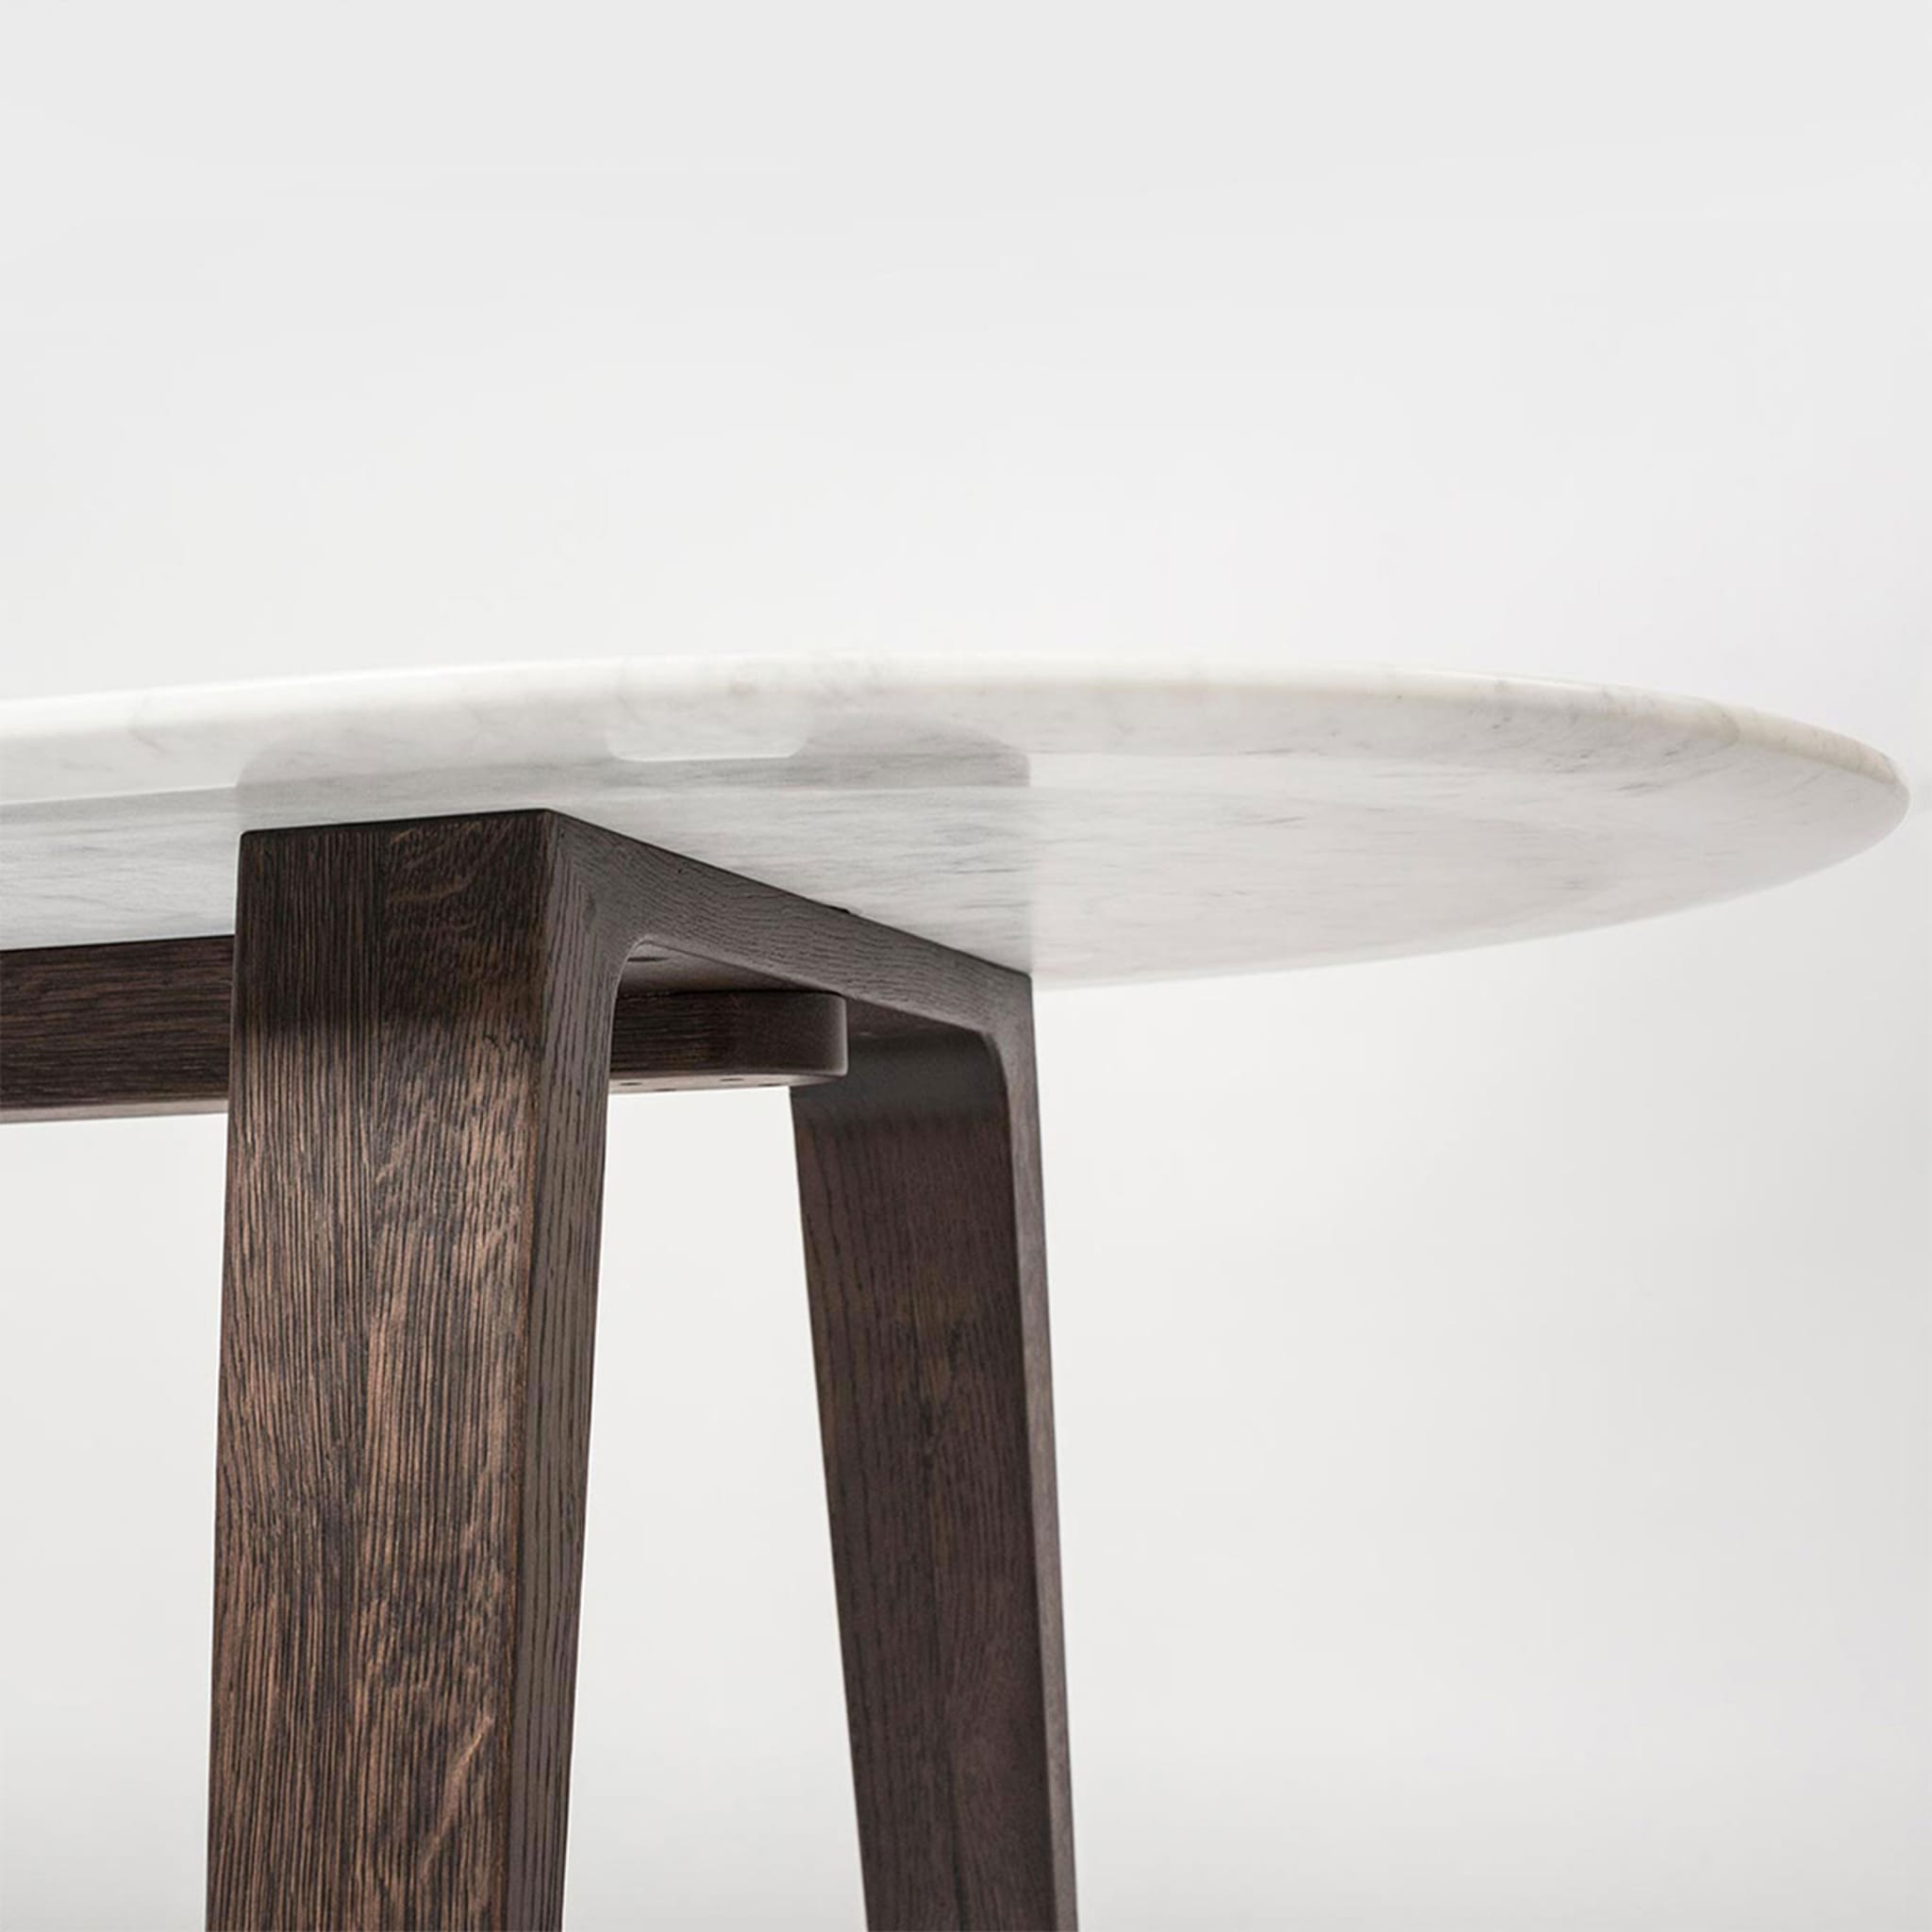 Maximus Dining Table by Emmanuel Gallina - Alternative view 2